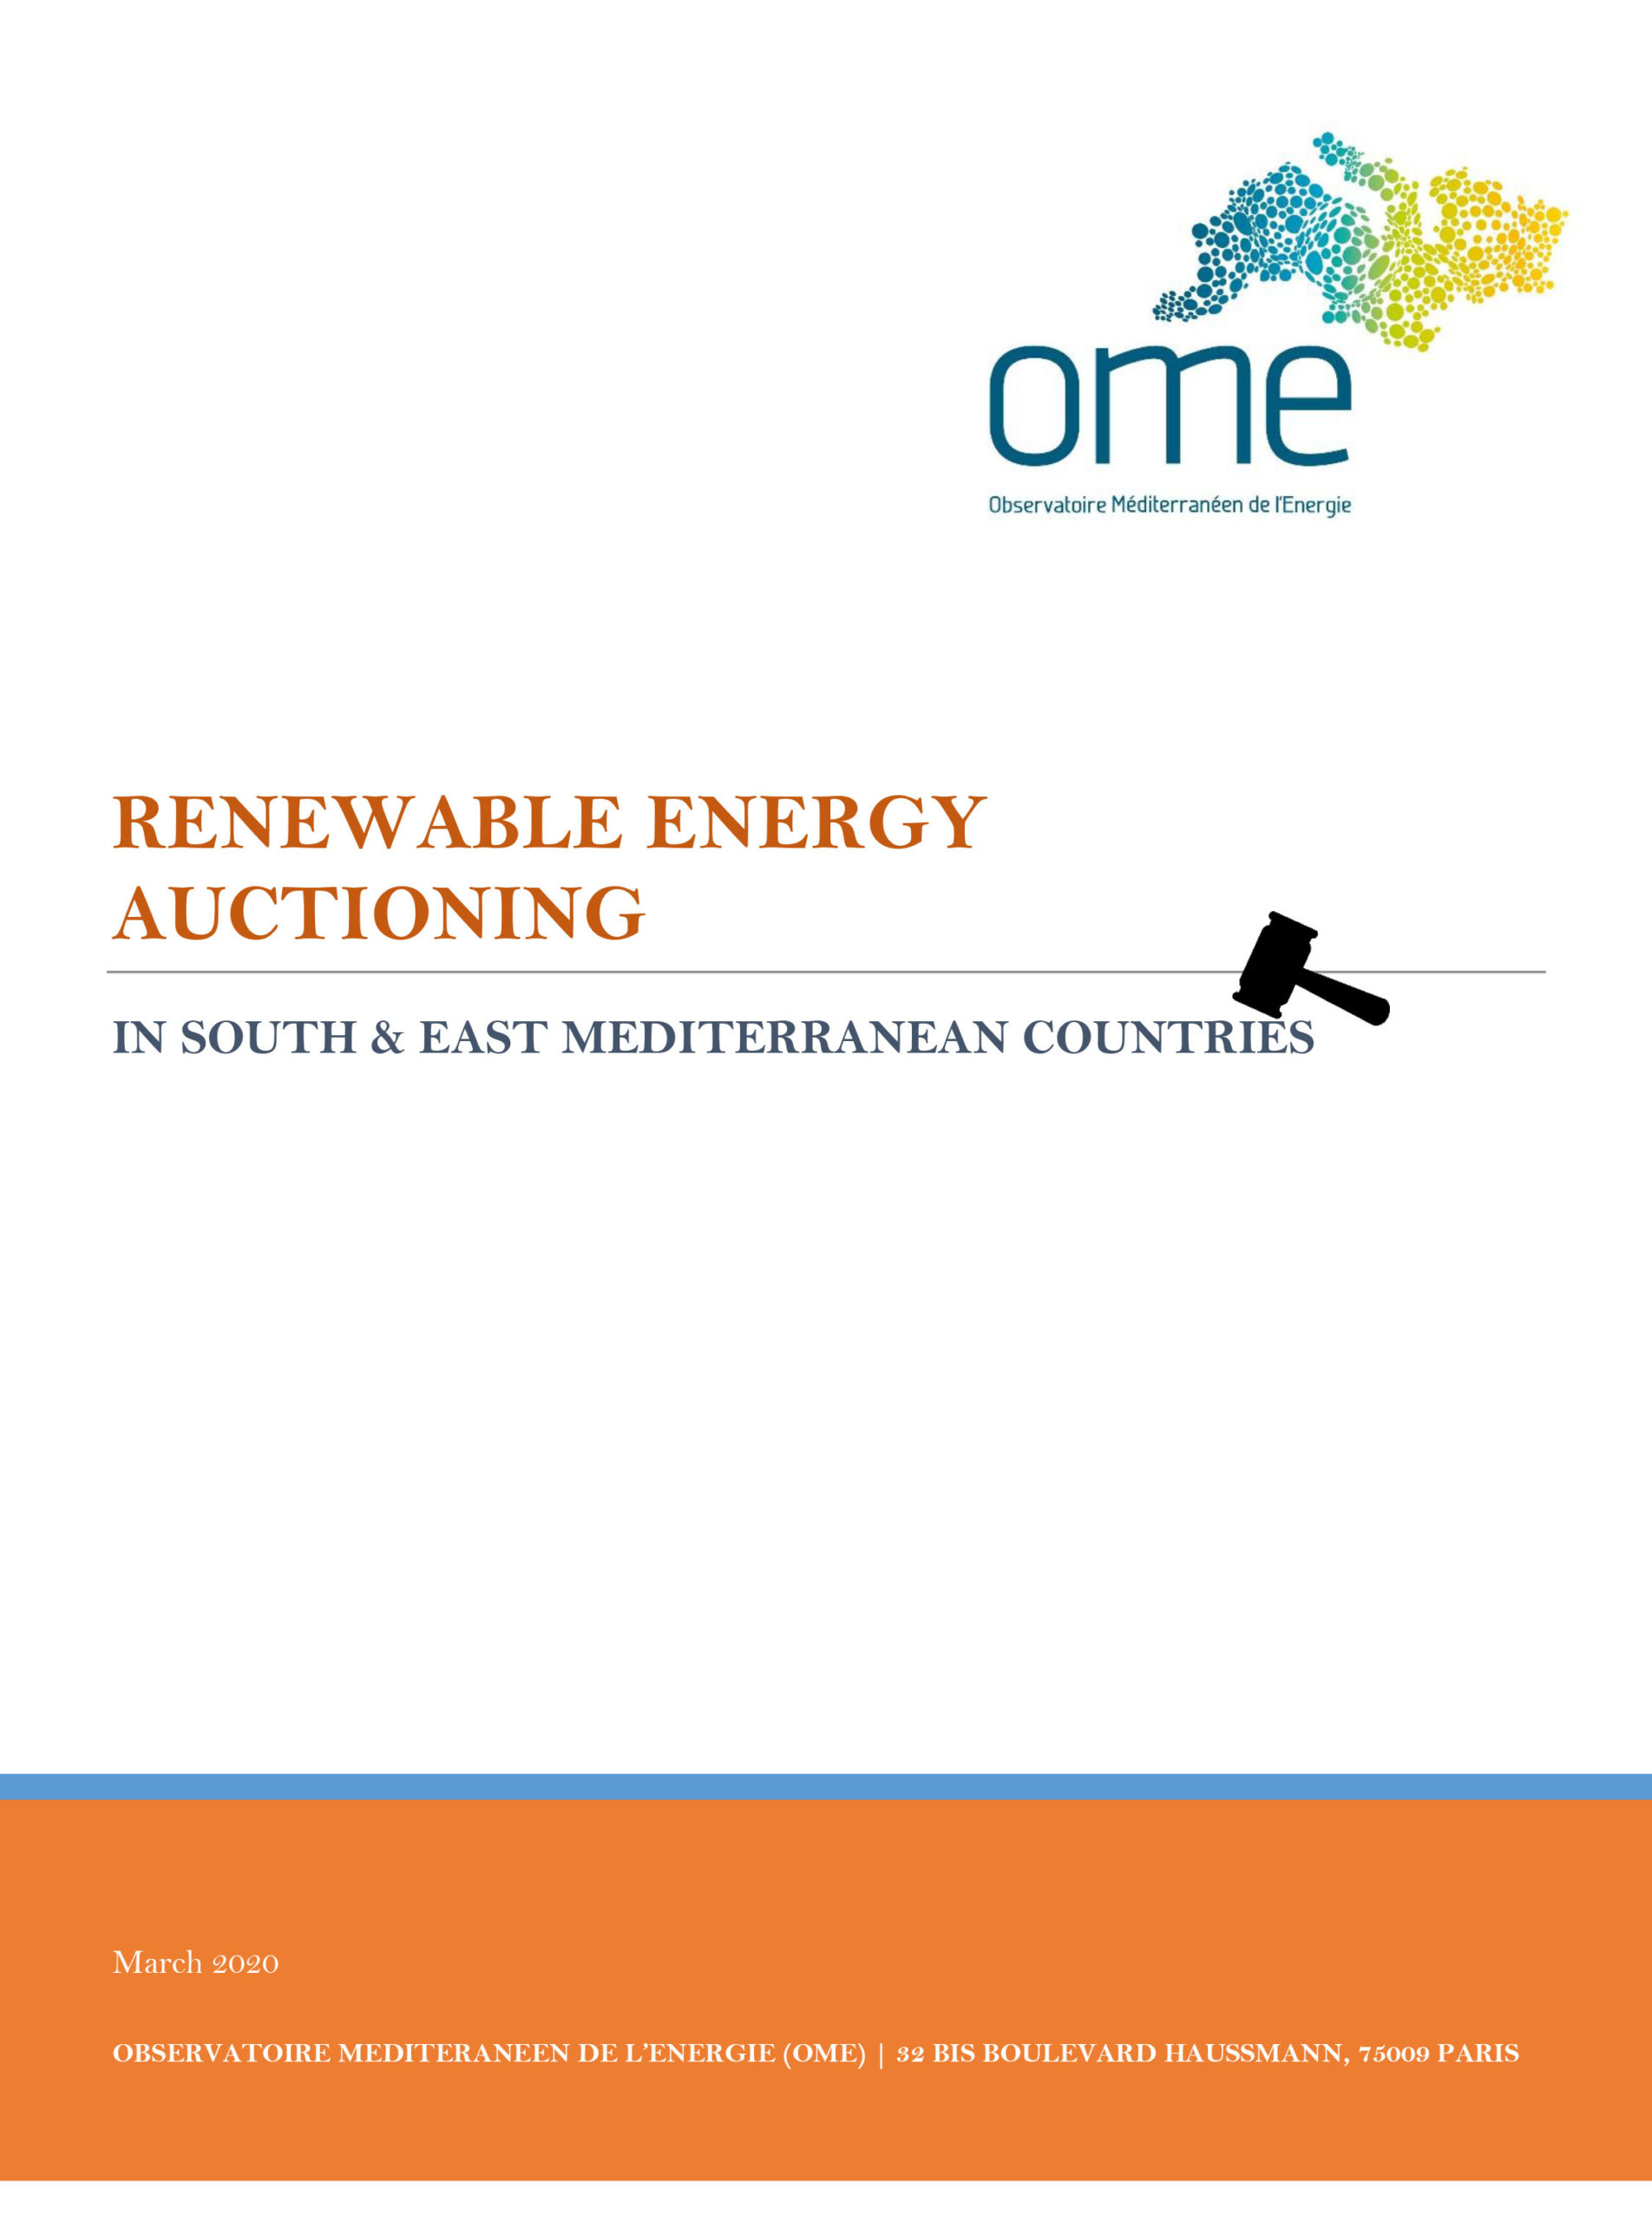 Renewable Energy Auctioning in South / East Mediterranean Countries, March 2020